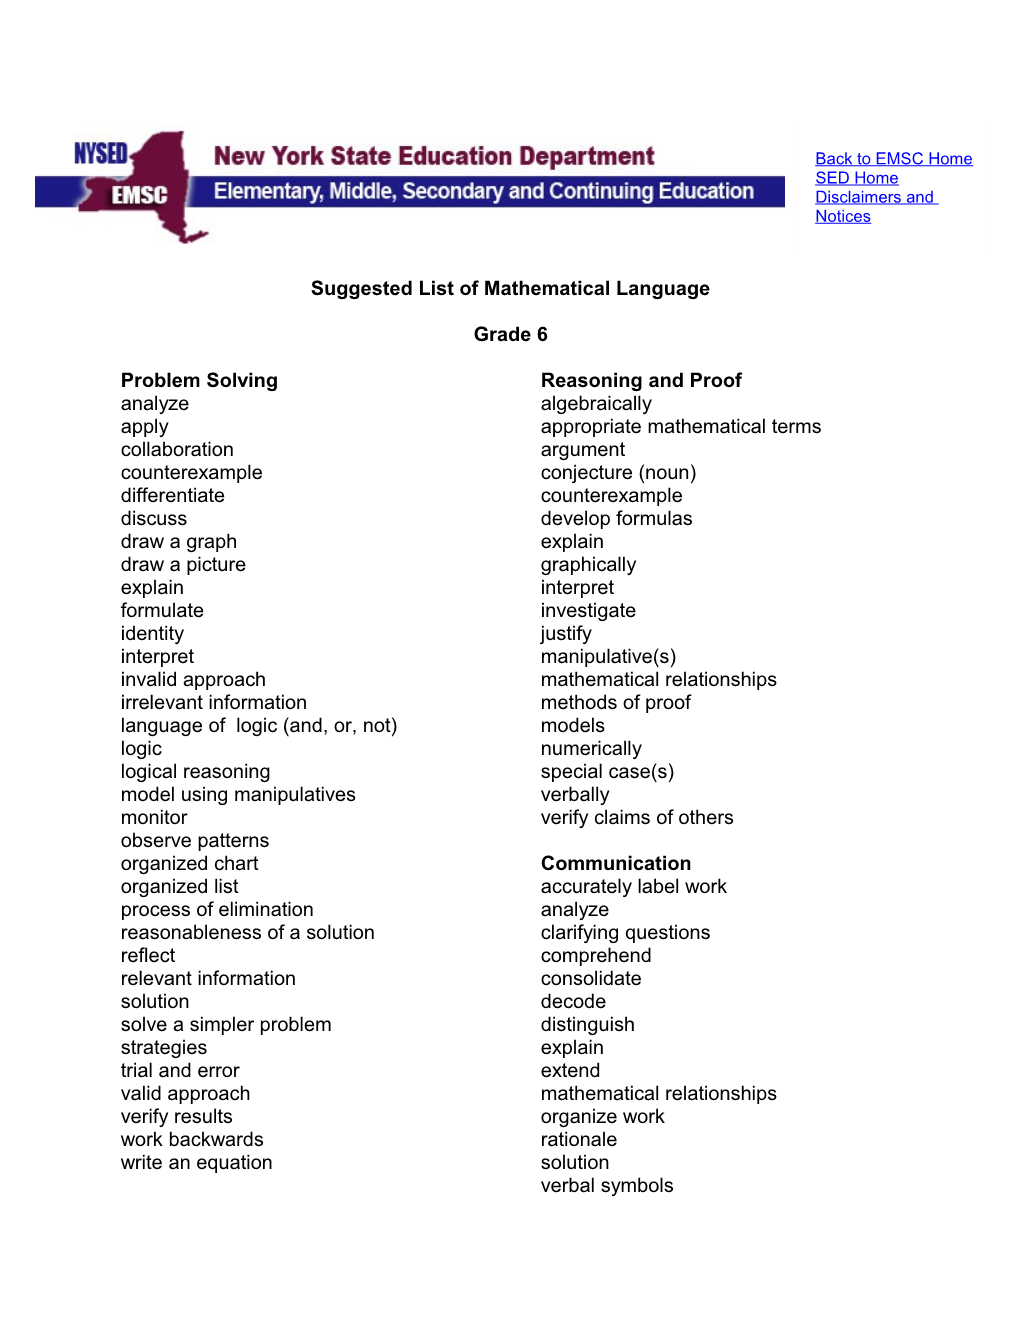 Suggested List of Mathematical Language